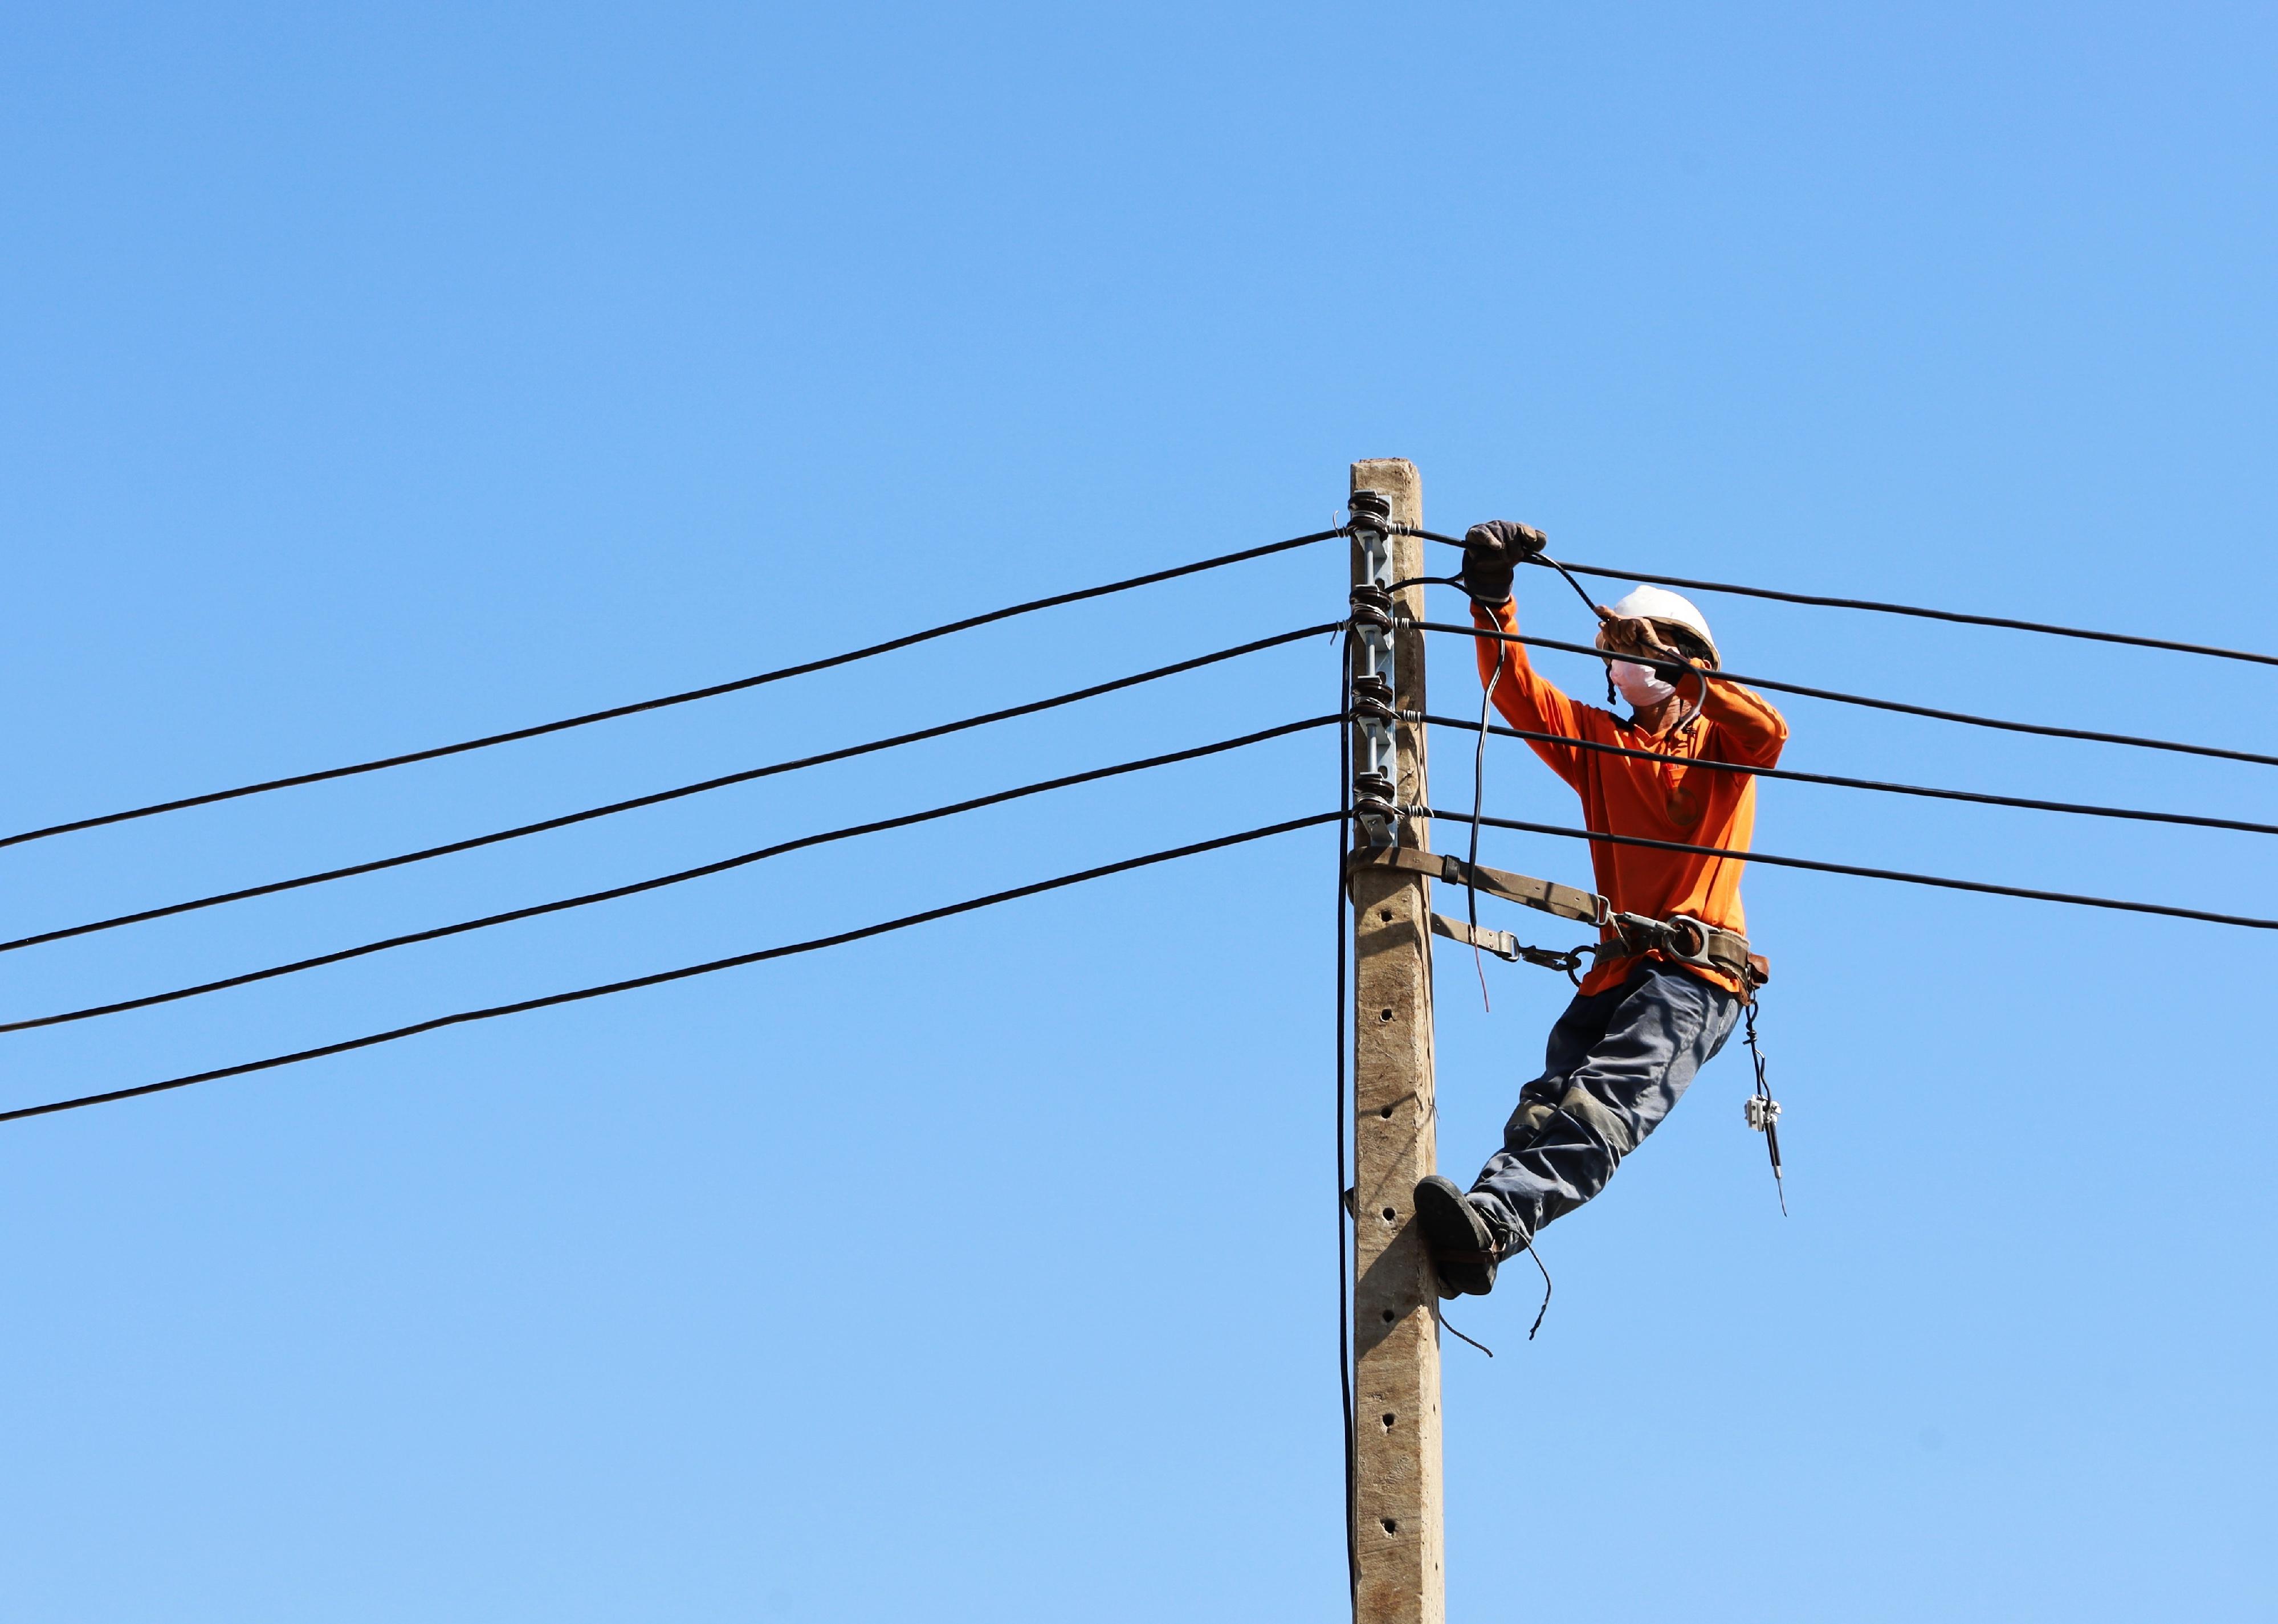 Technician connecting wires on electric poles.